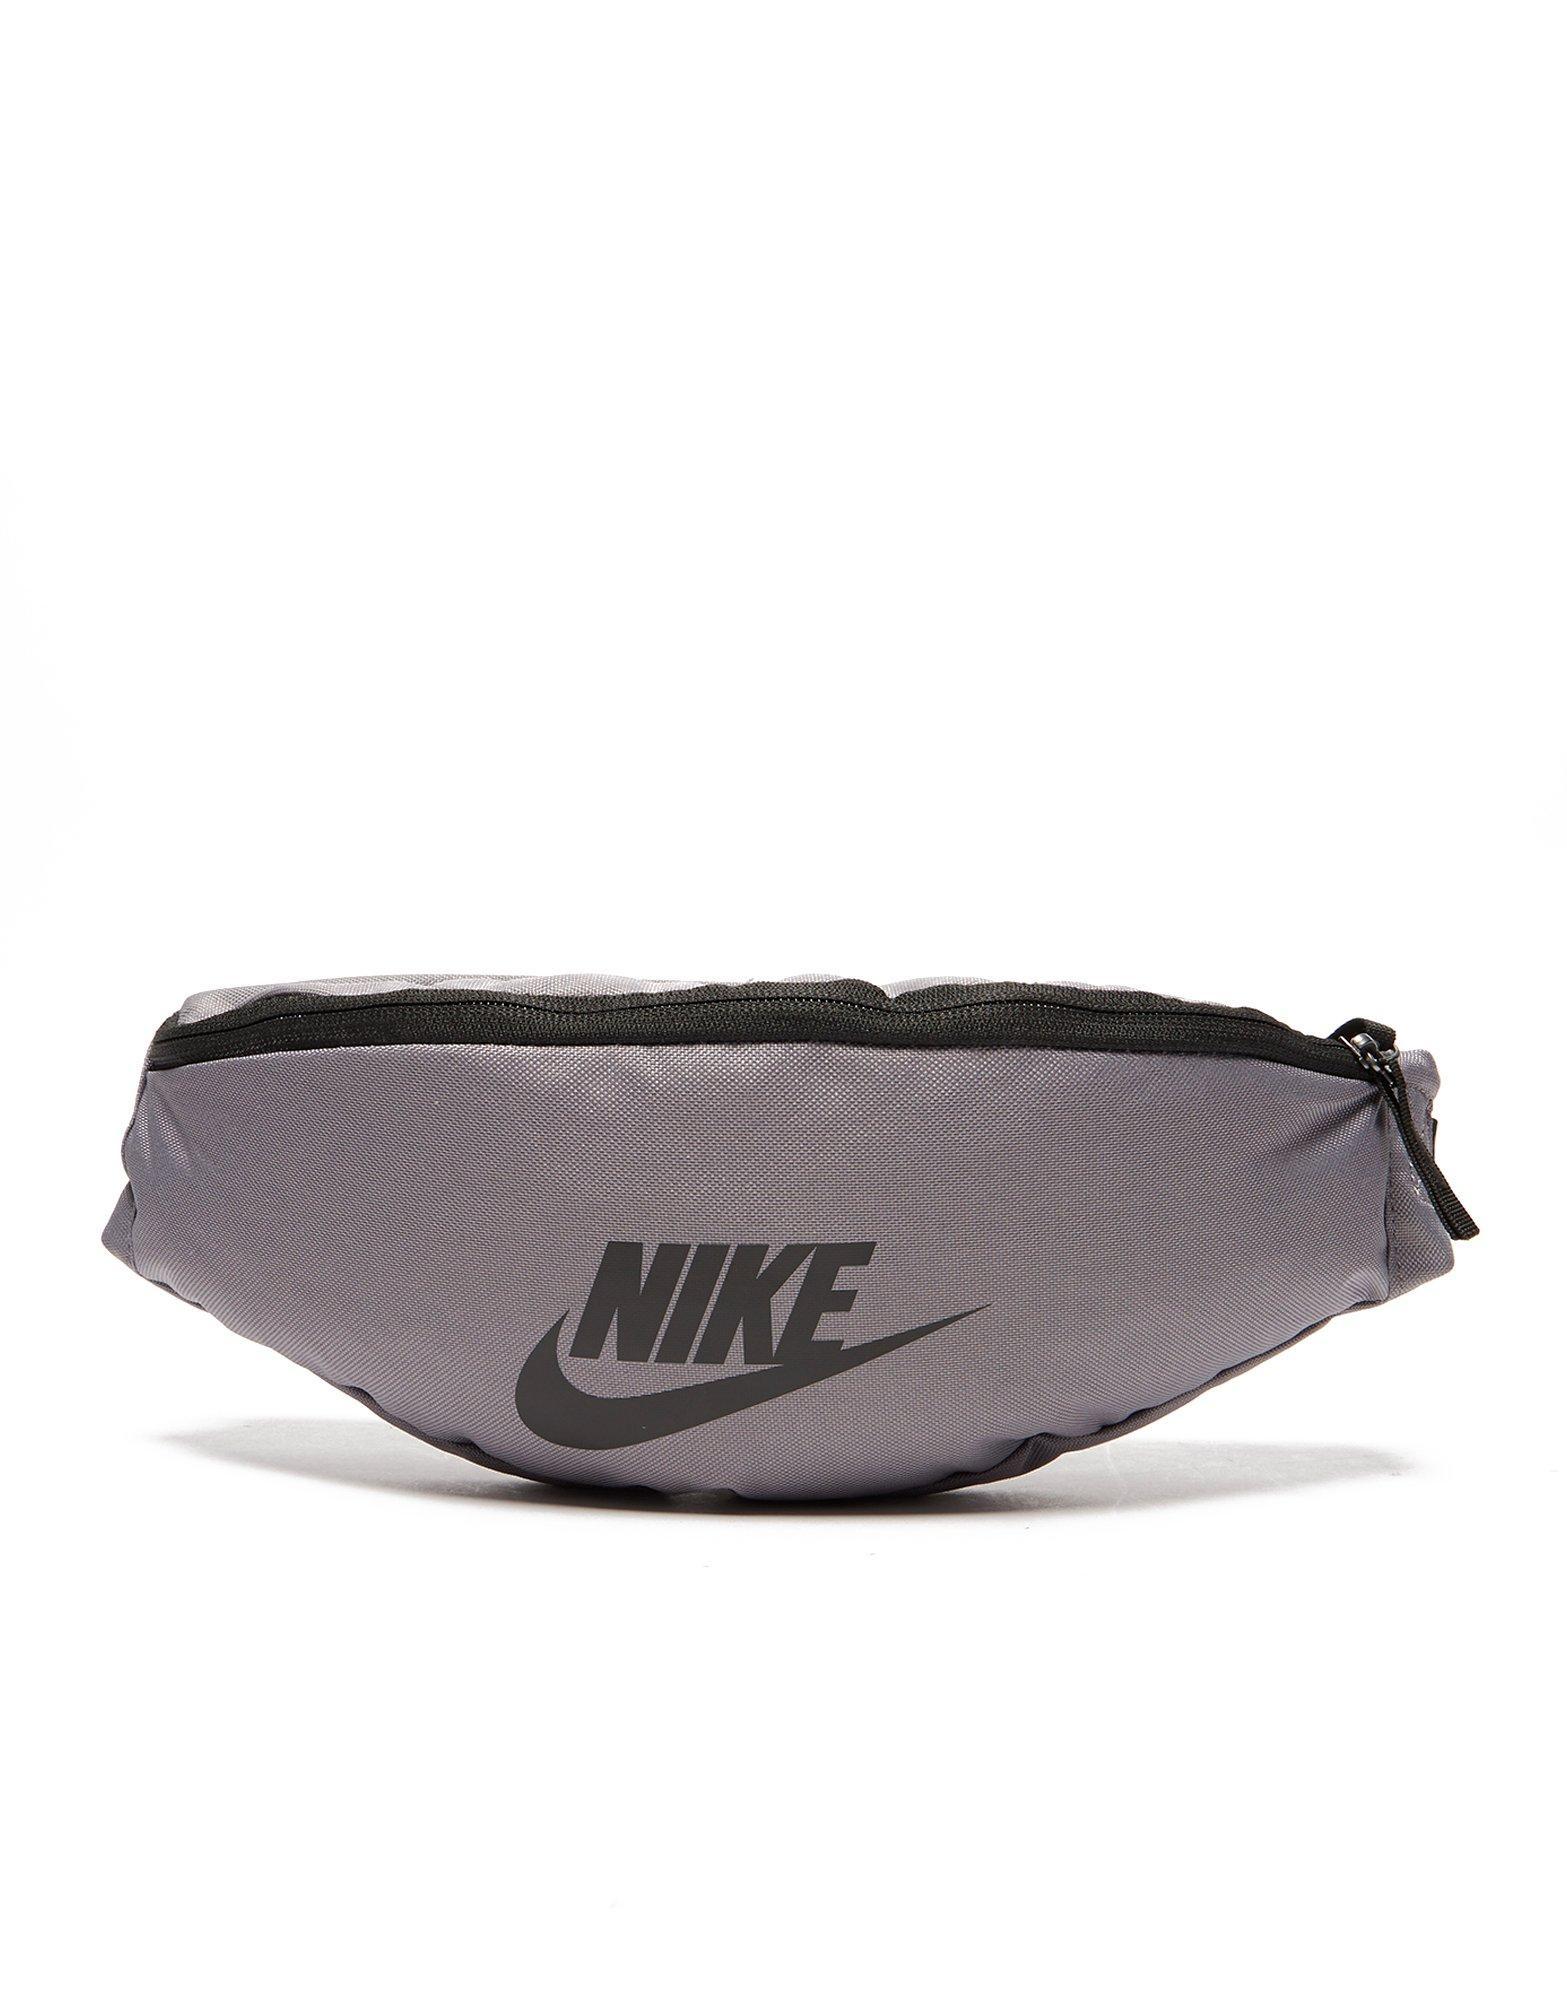 Nike Synthetic Waist Bag in Grey (Gray) for Men - Lyst